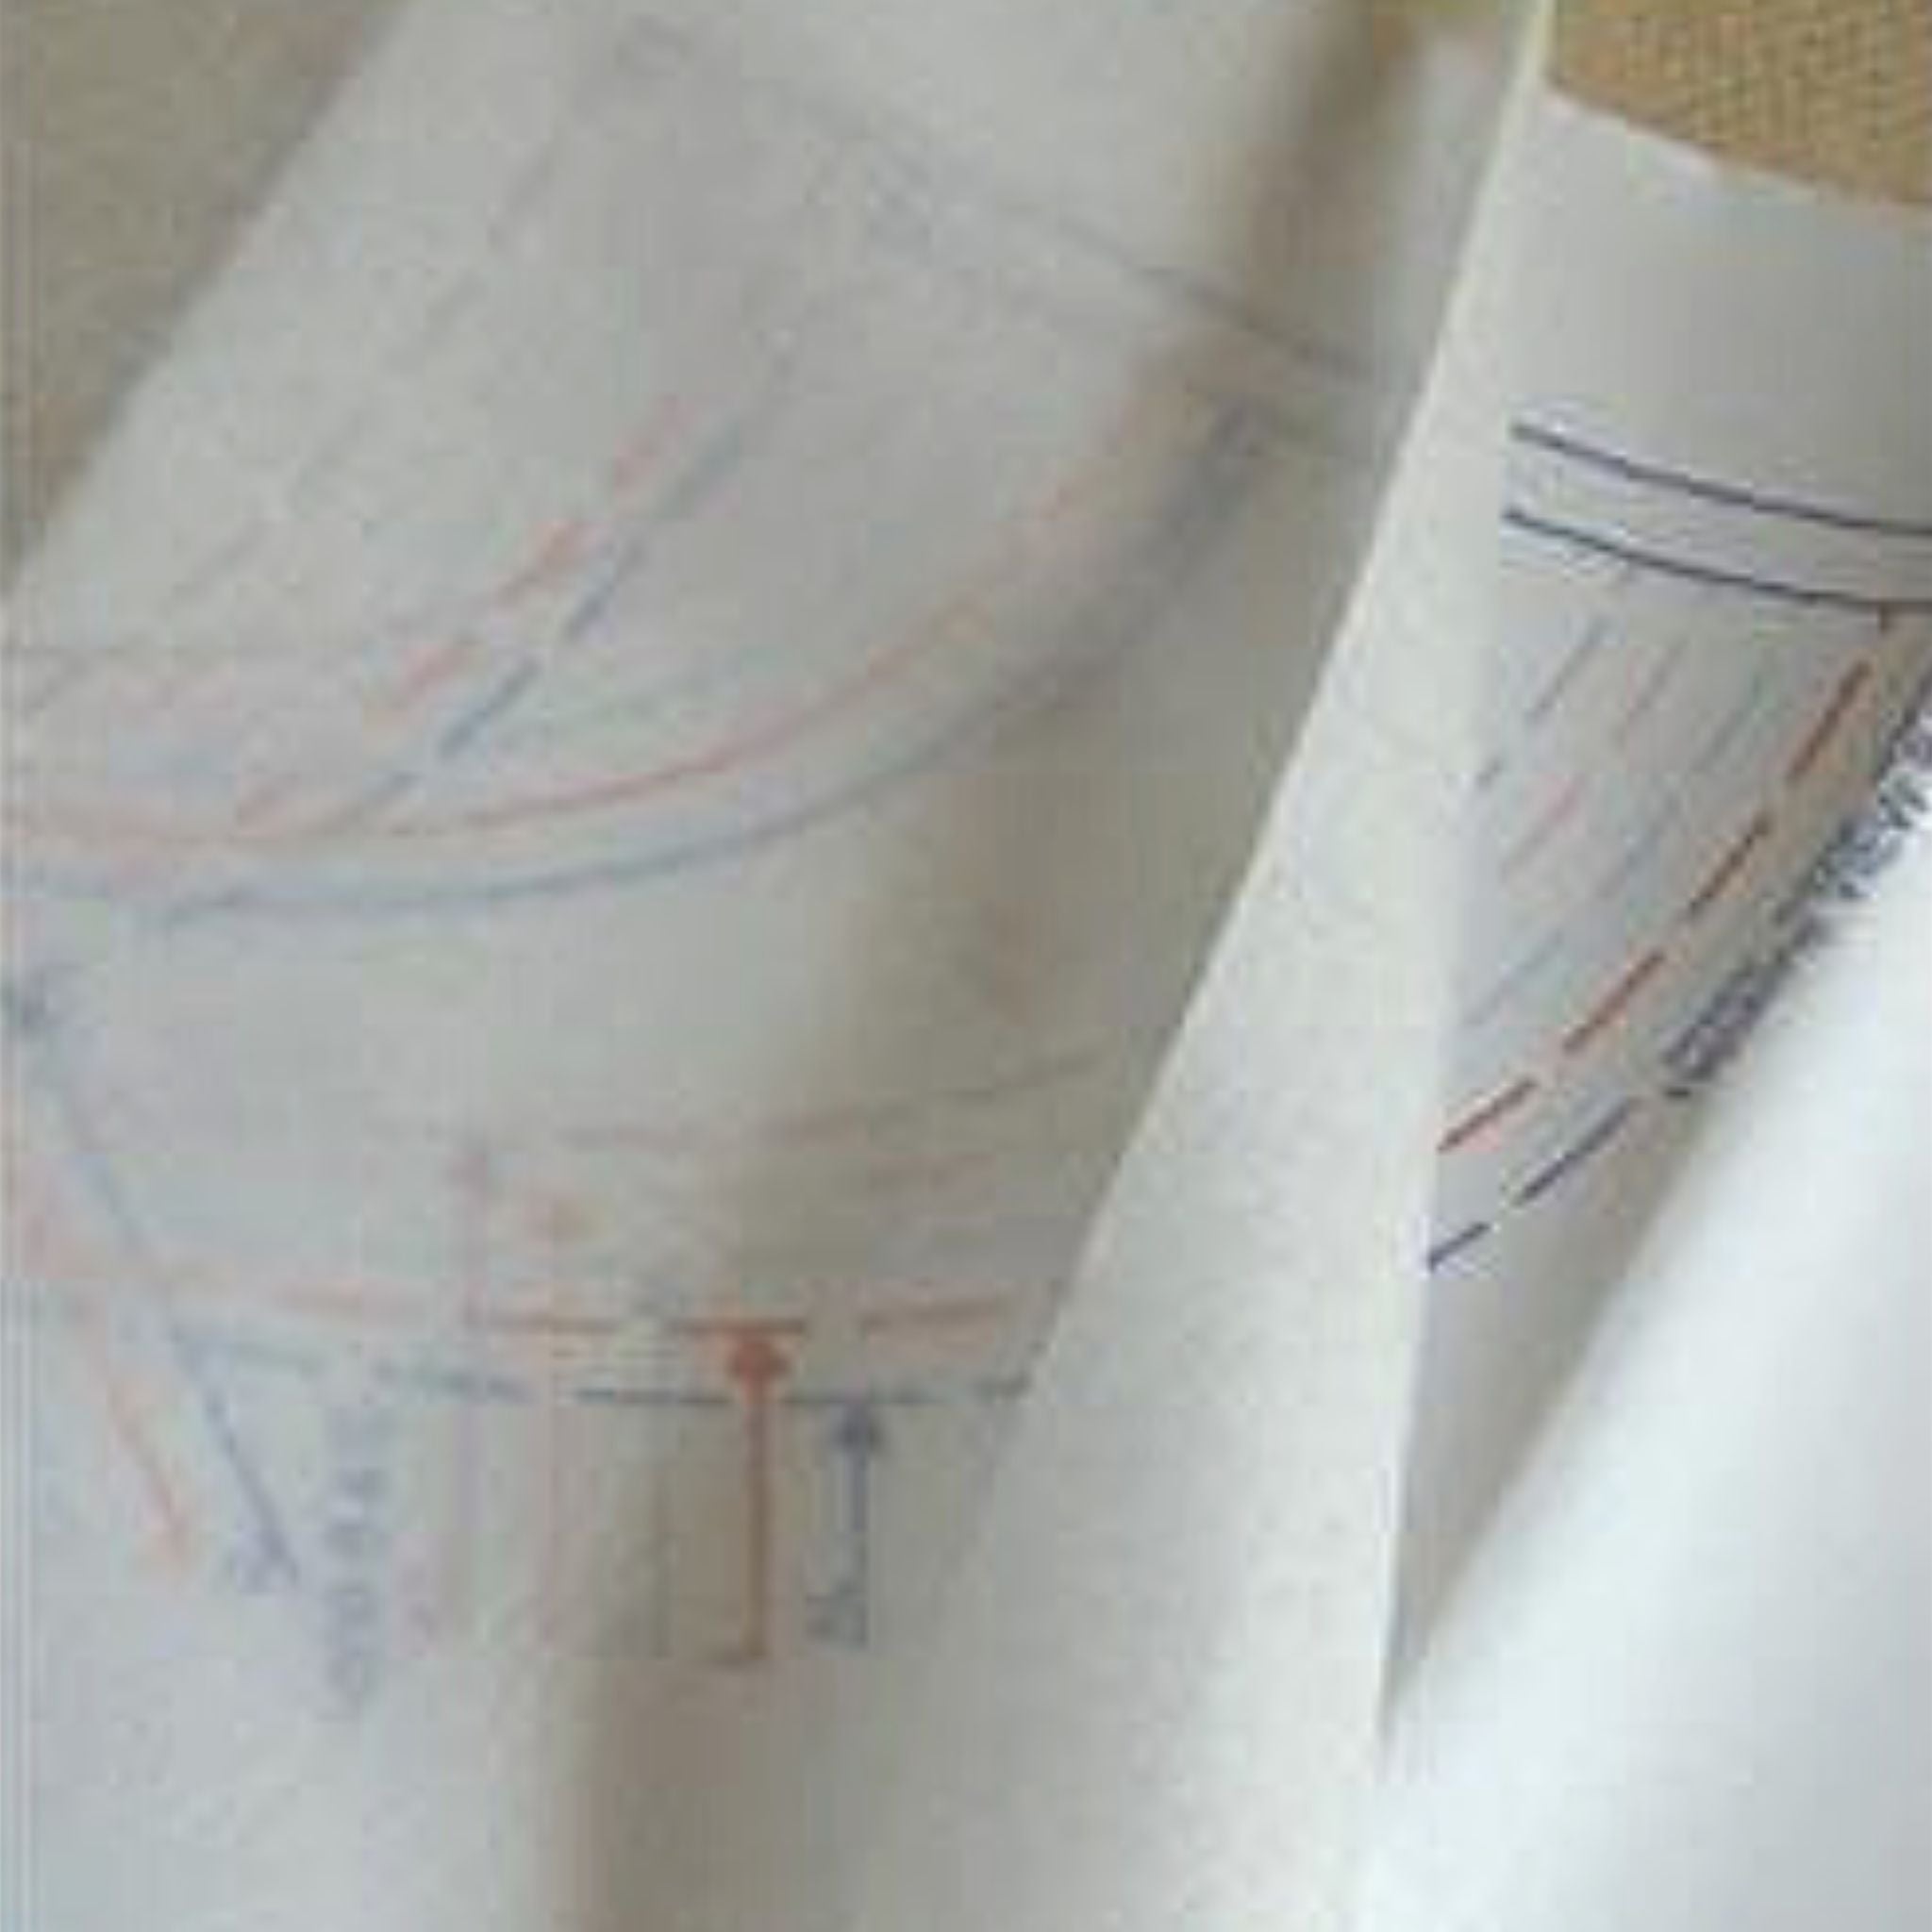 Tracing paper